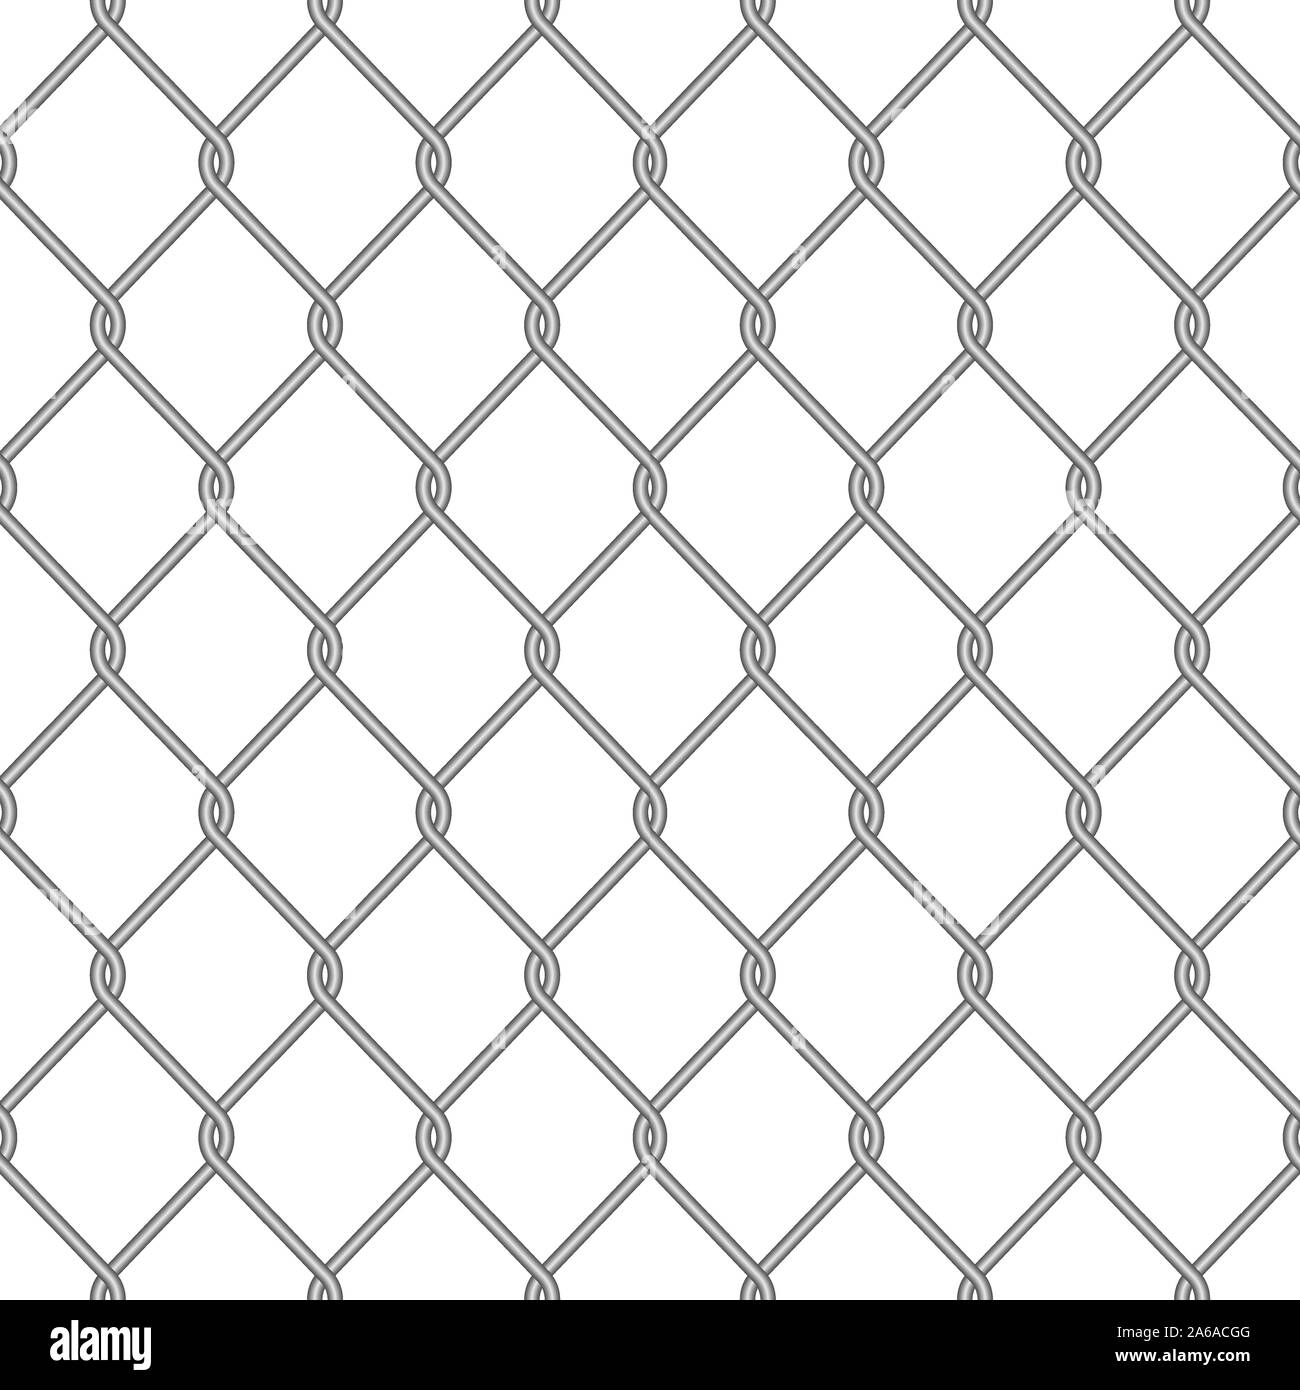 Realistic metal chain link fence seamless pattern isolated Stock Vector